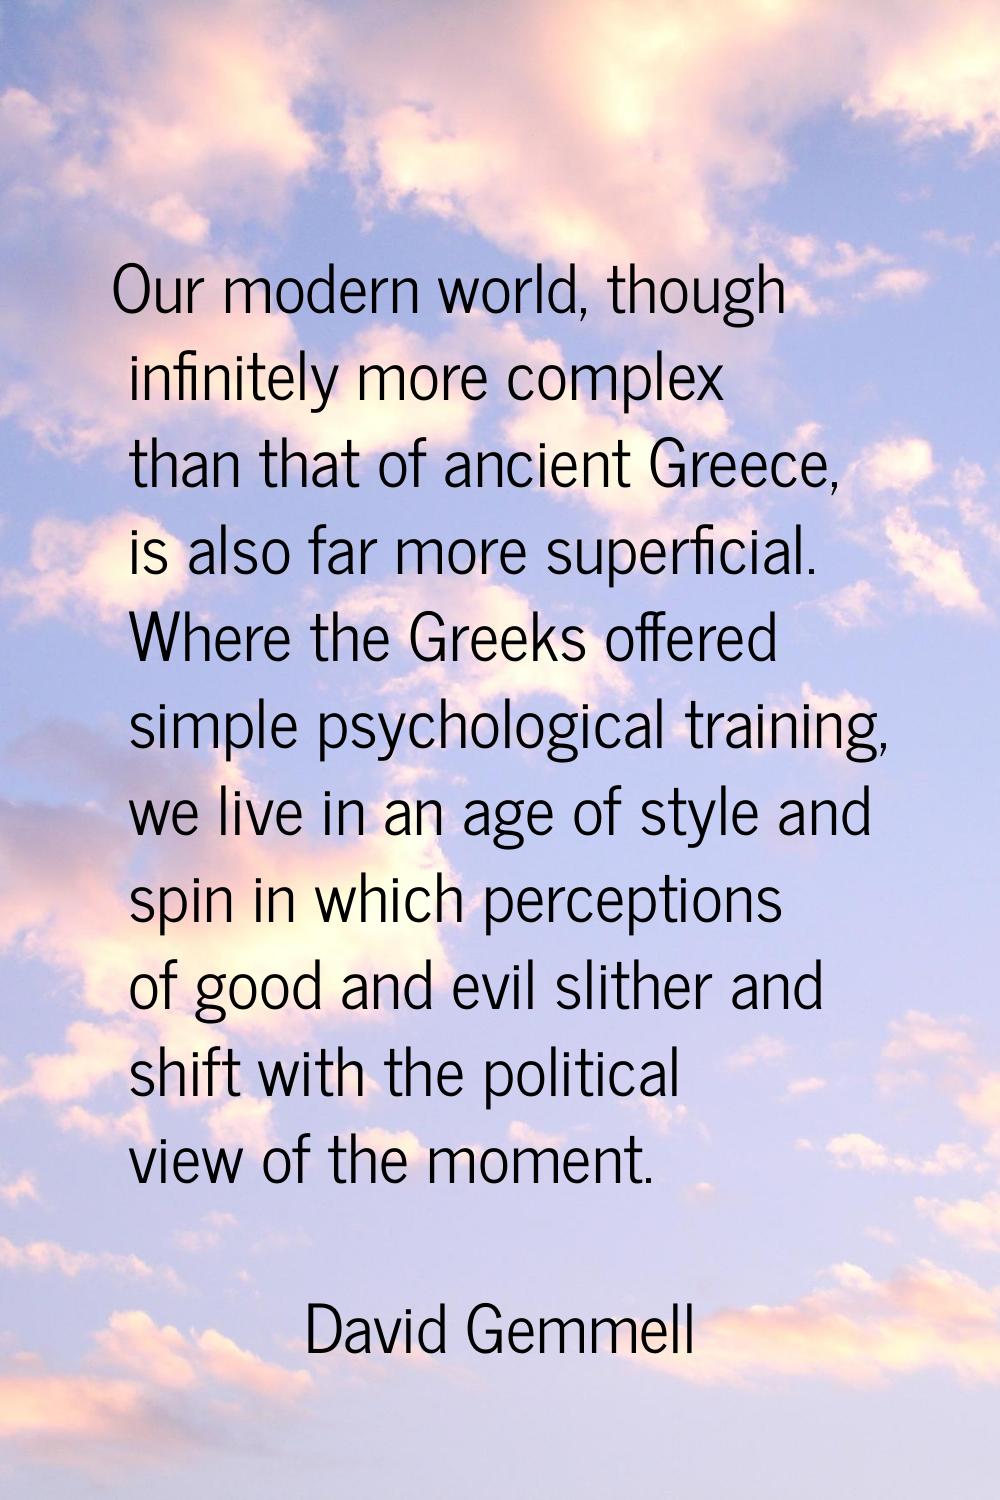 Our modern world, though infinitely more complex than that of ancient Greece, is also far more supe